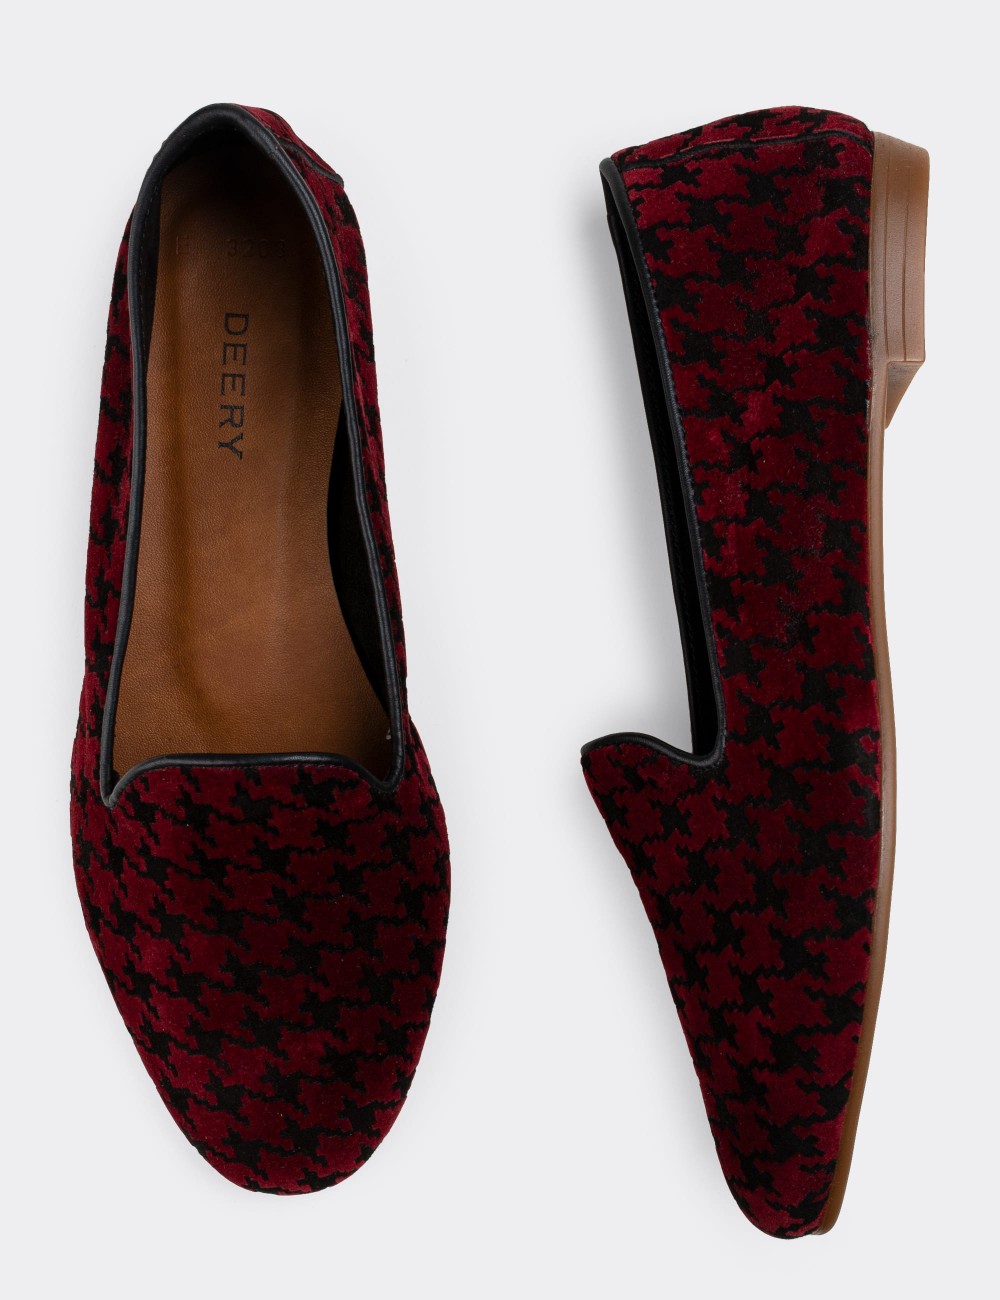 Burgundy Suede Leather Loafers  - E3208ZBRDC01